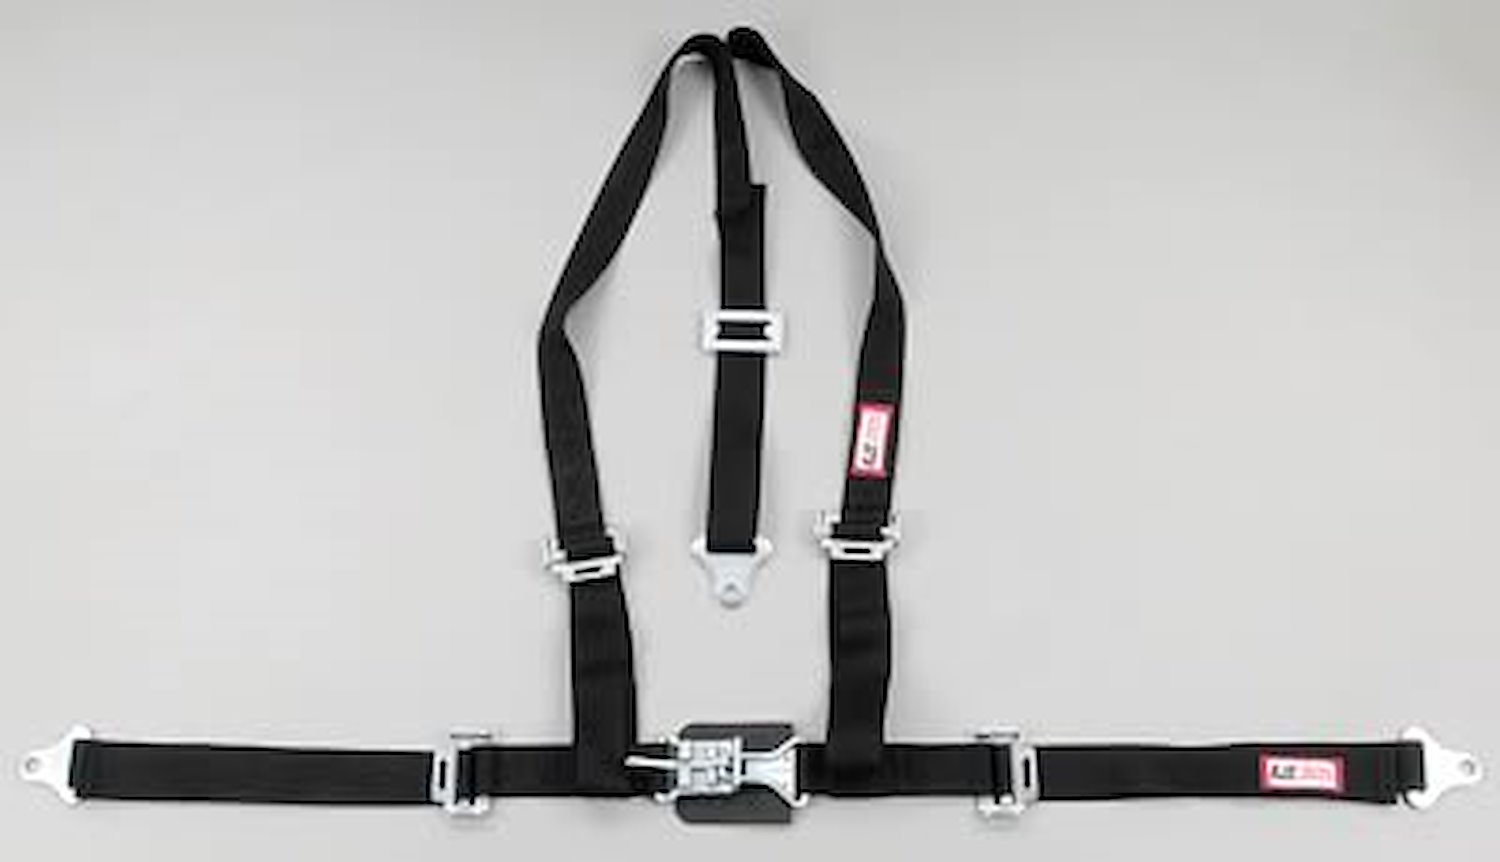 NON-SFI L&L HARNESS 2 PULL UP Lap Belt SNAP SEWN IN 2 S.H. INDIVIDUAL FLOOR Mount WRAP/BOLT ORANGE